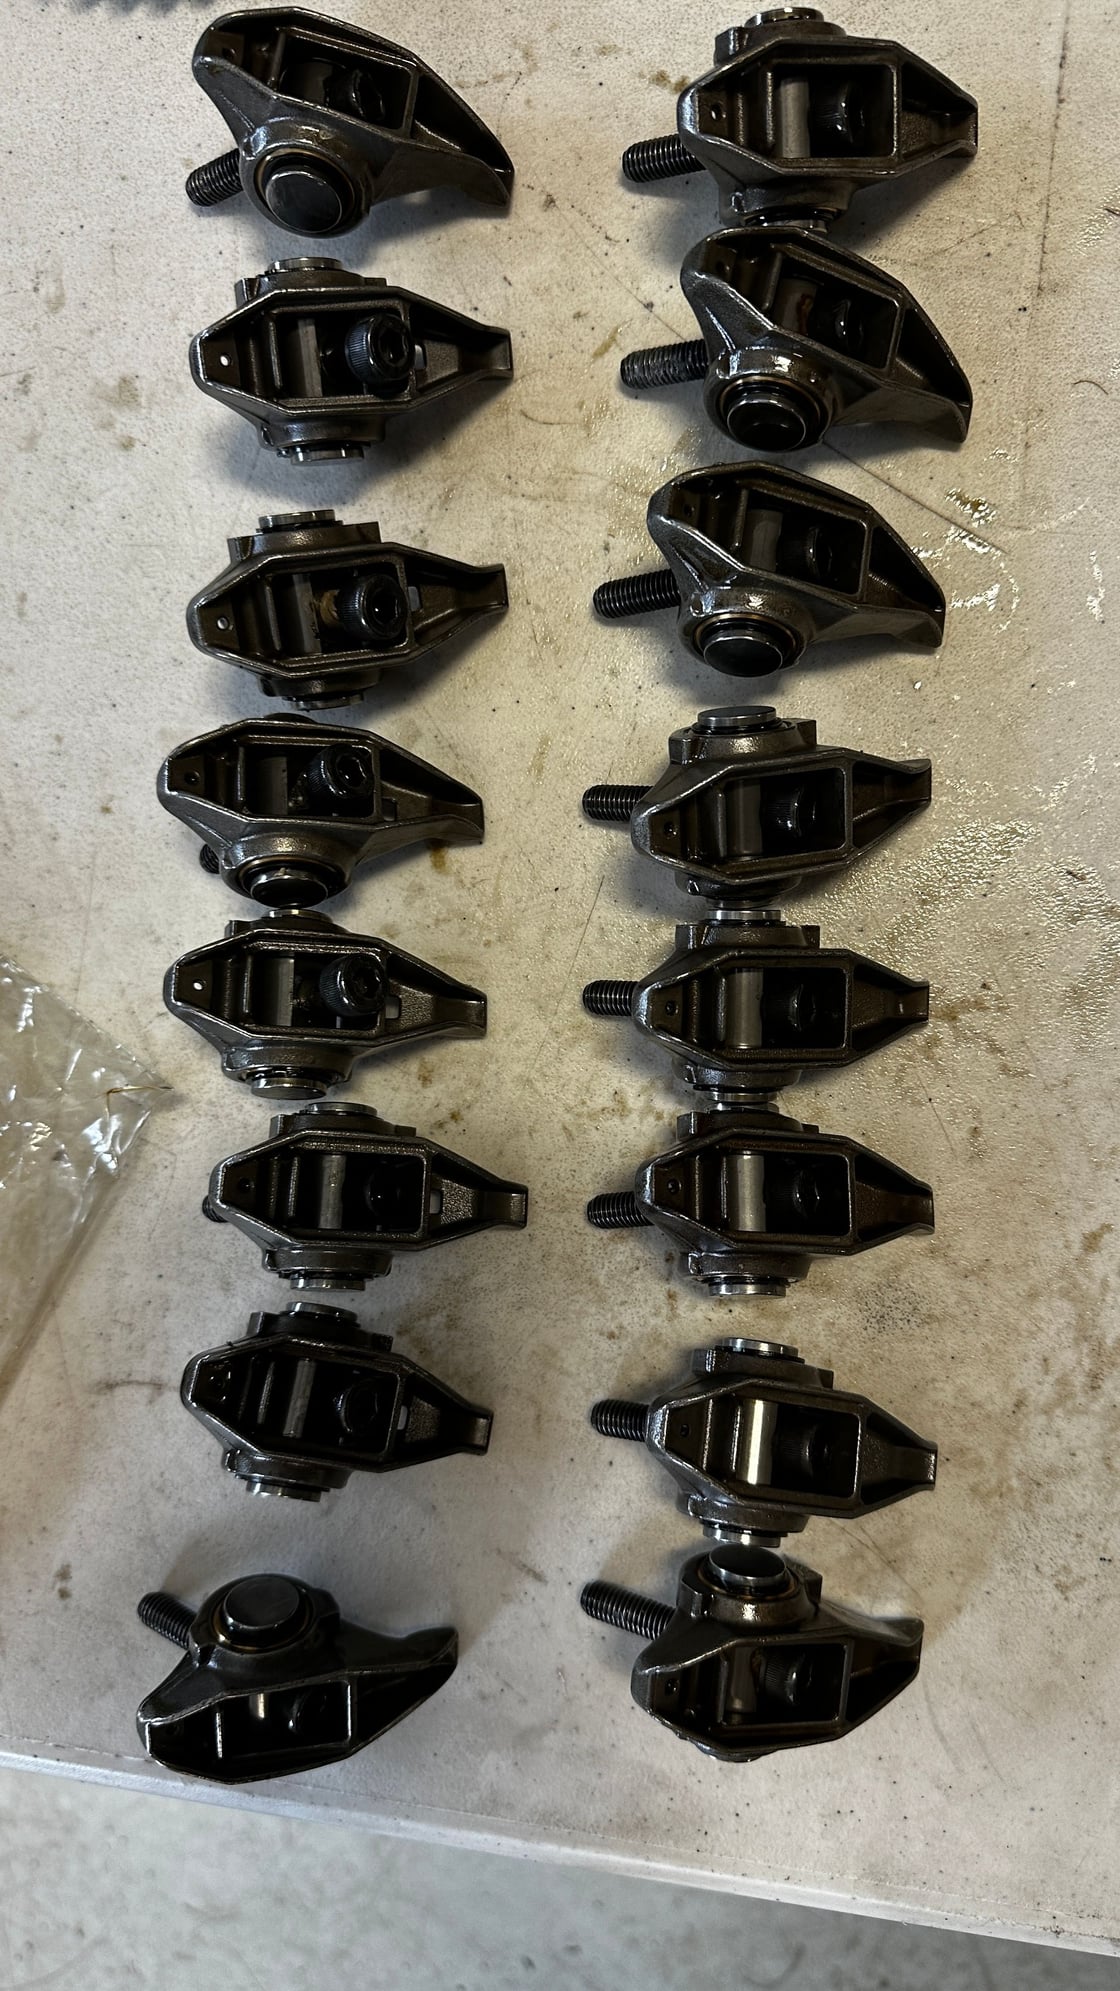 Engine - Intake/Fuel - Greg Good Ported PRC 247 Heads with Matching Cam and Intake 400+ci... - Used - 0  All Models - Tomball, TX 77377, United States